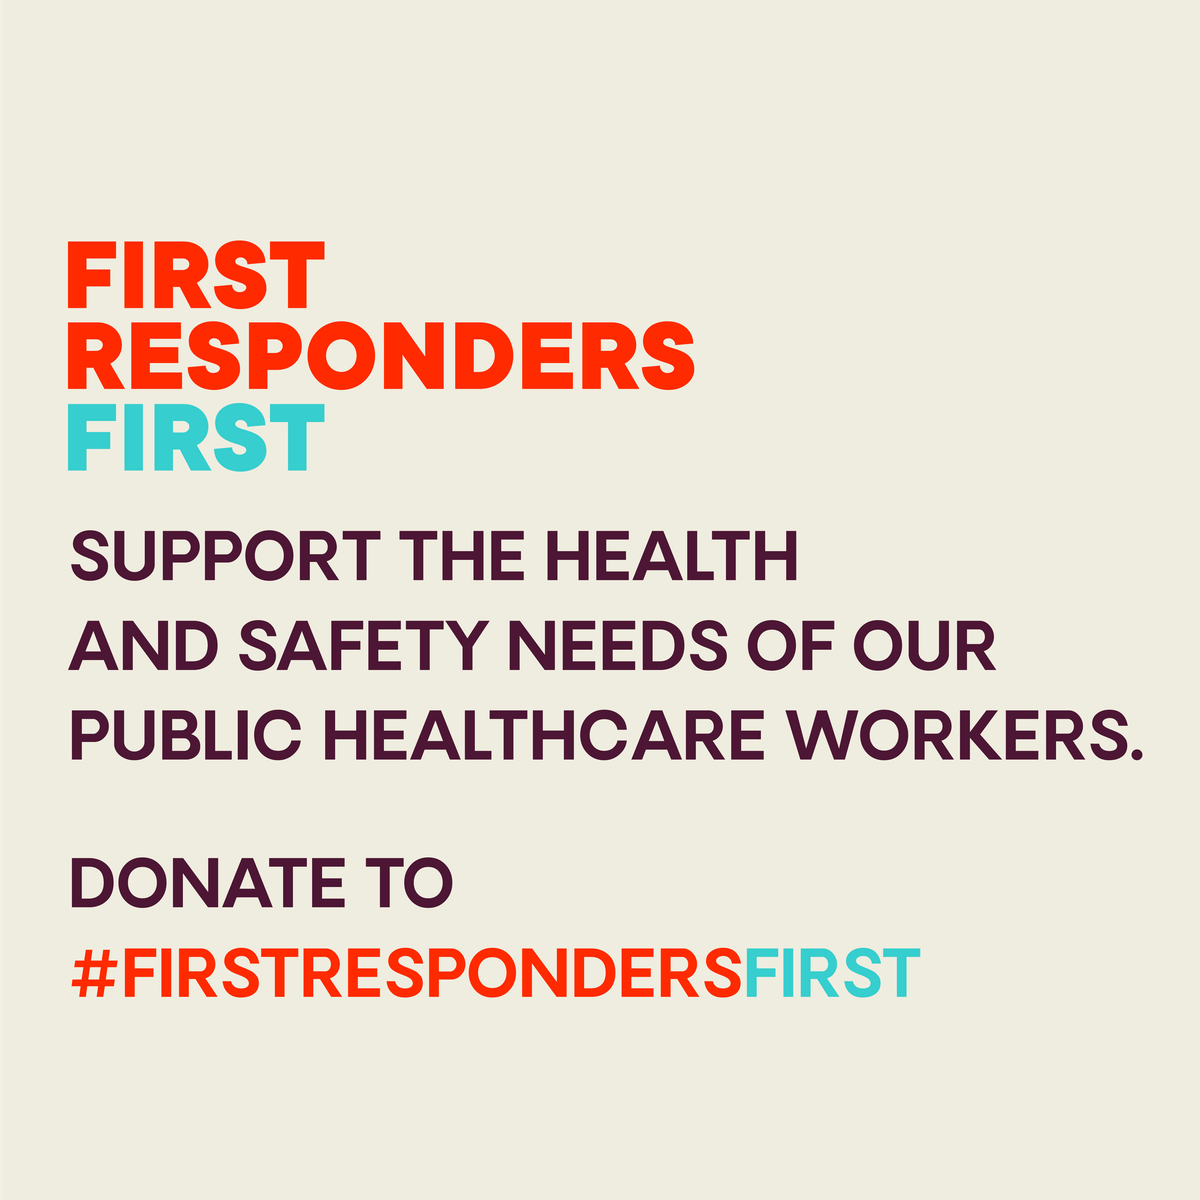 First Responders First - Support the Health and Safety Needs of Our Public Healthcare Workers